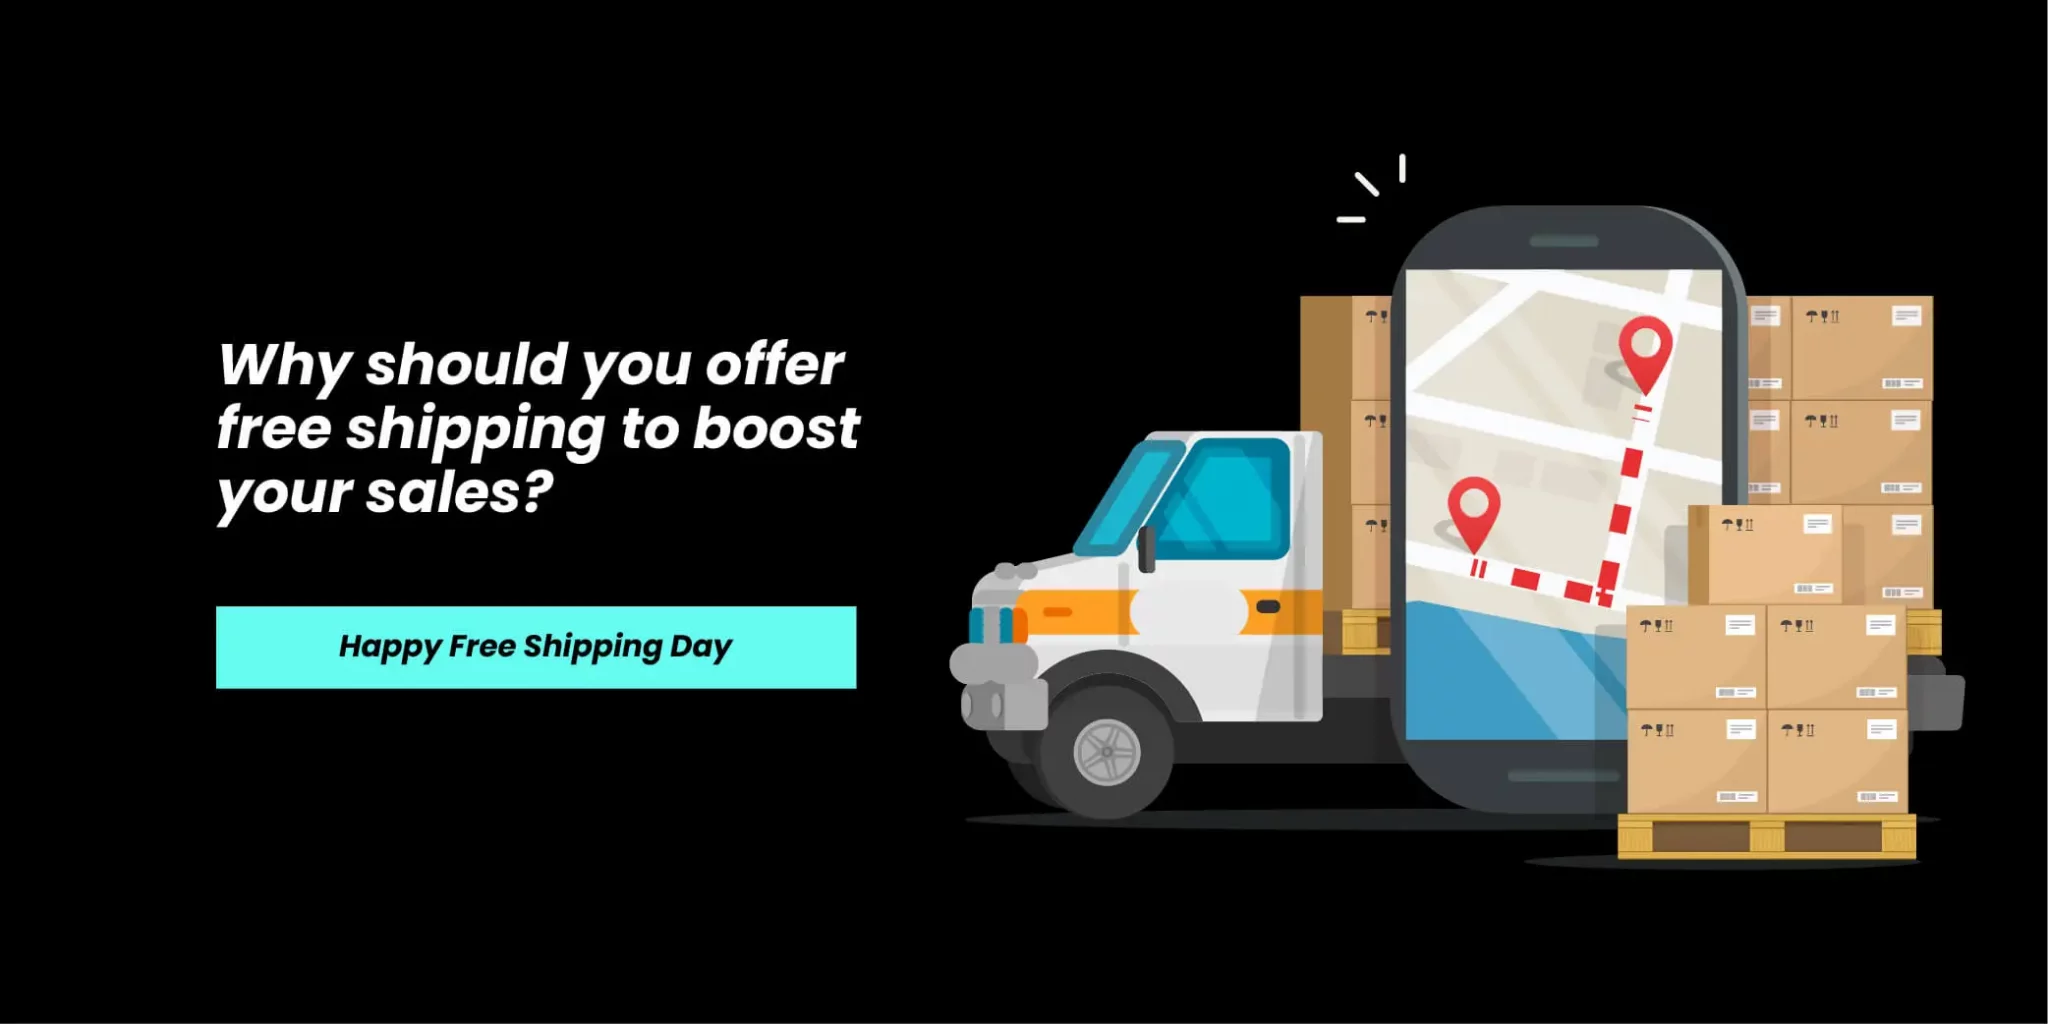 Why should you offer free shipping?